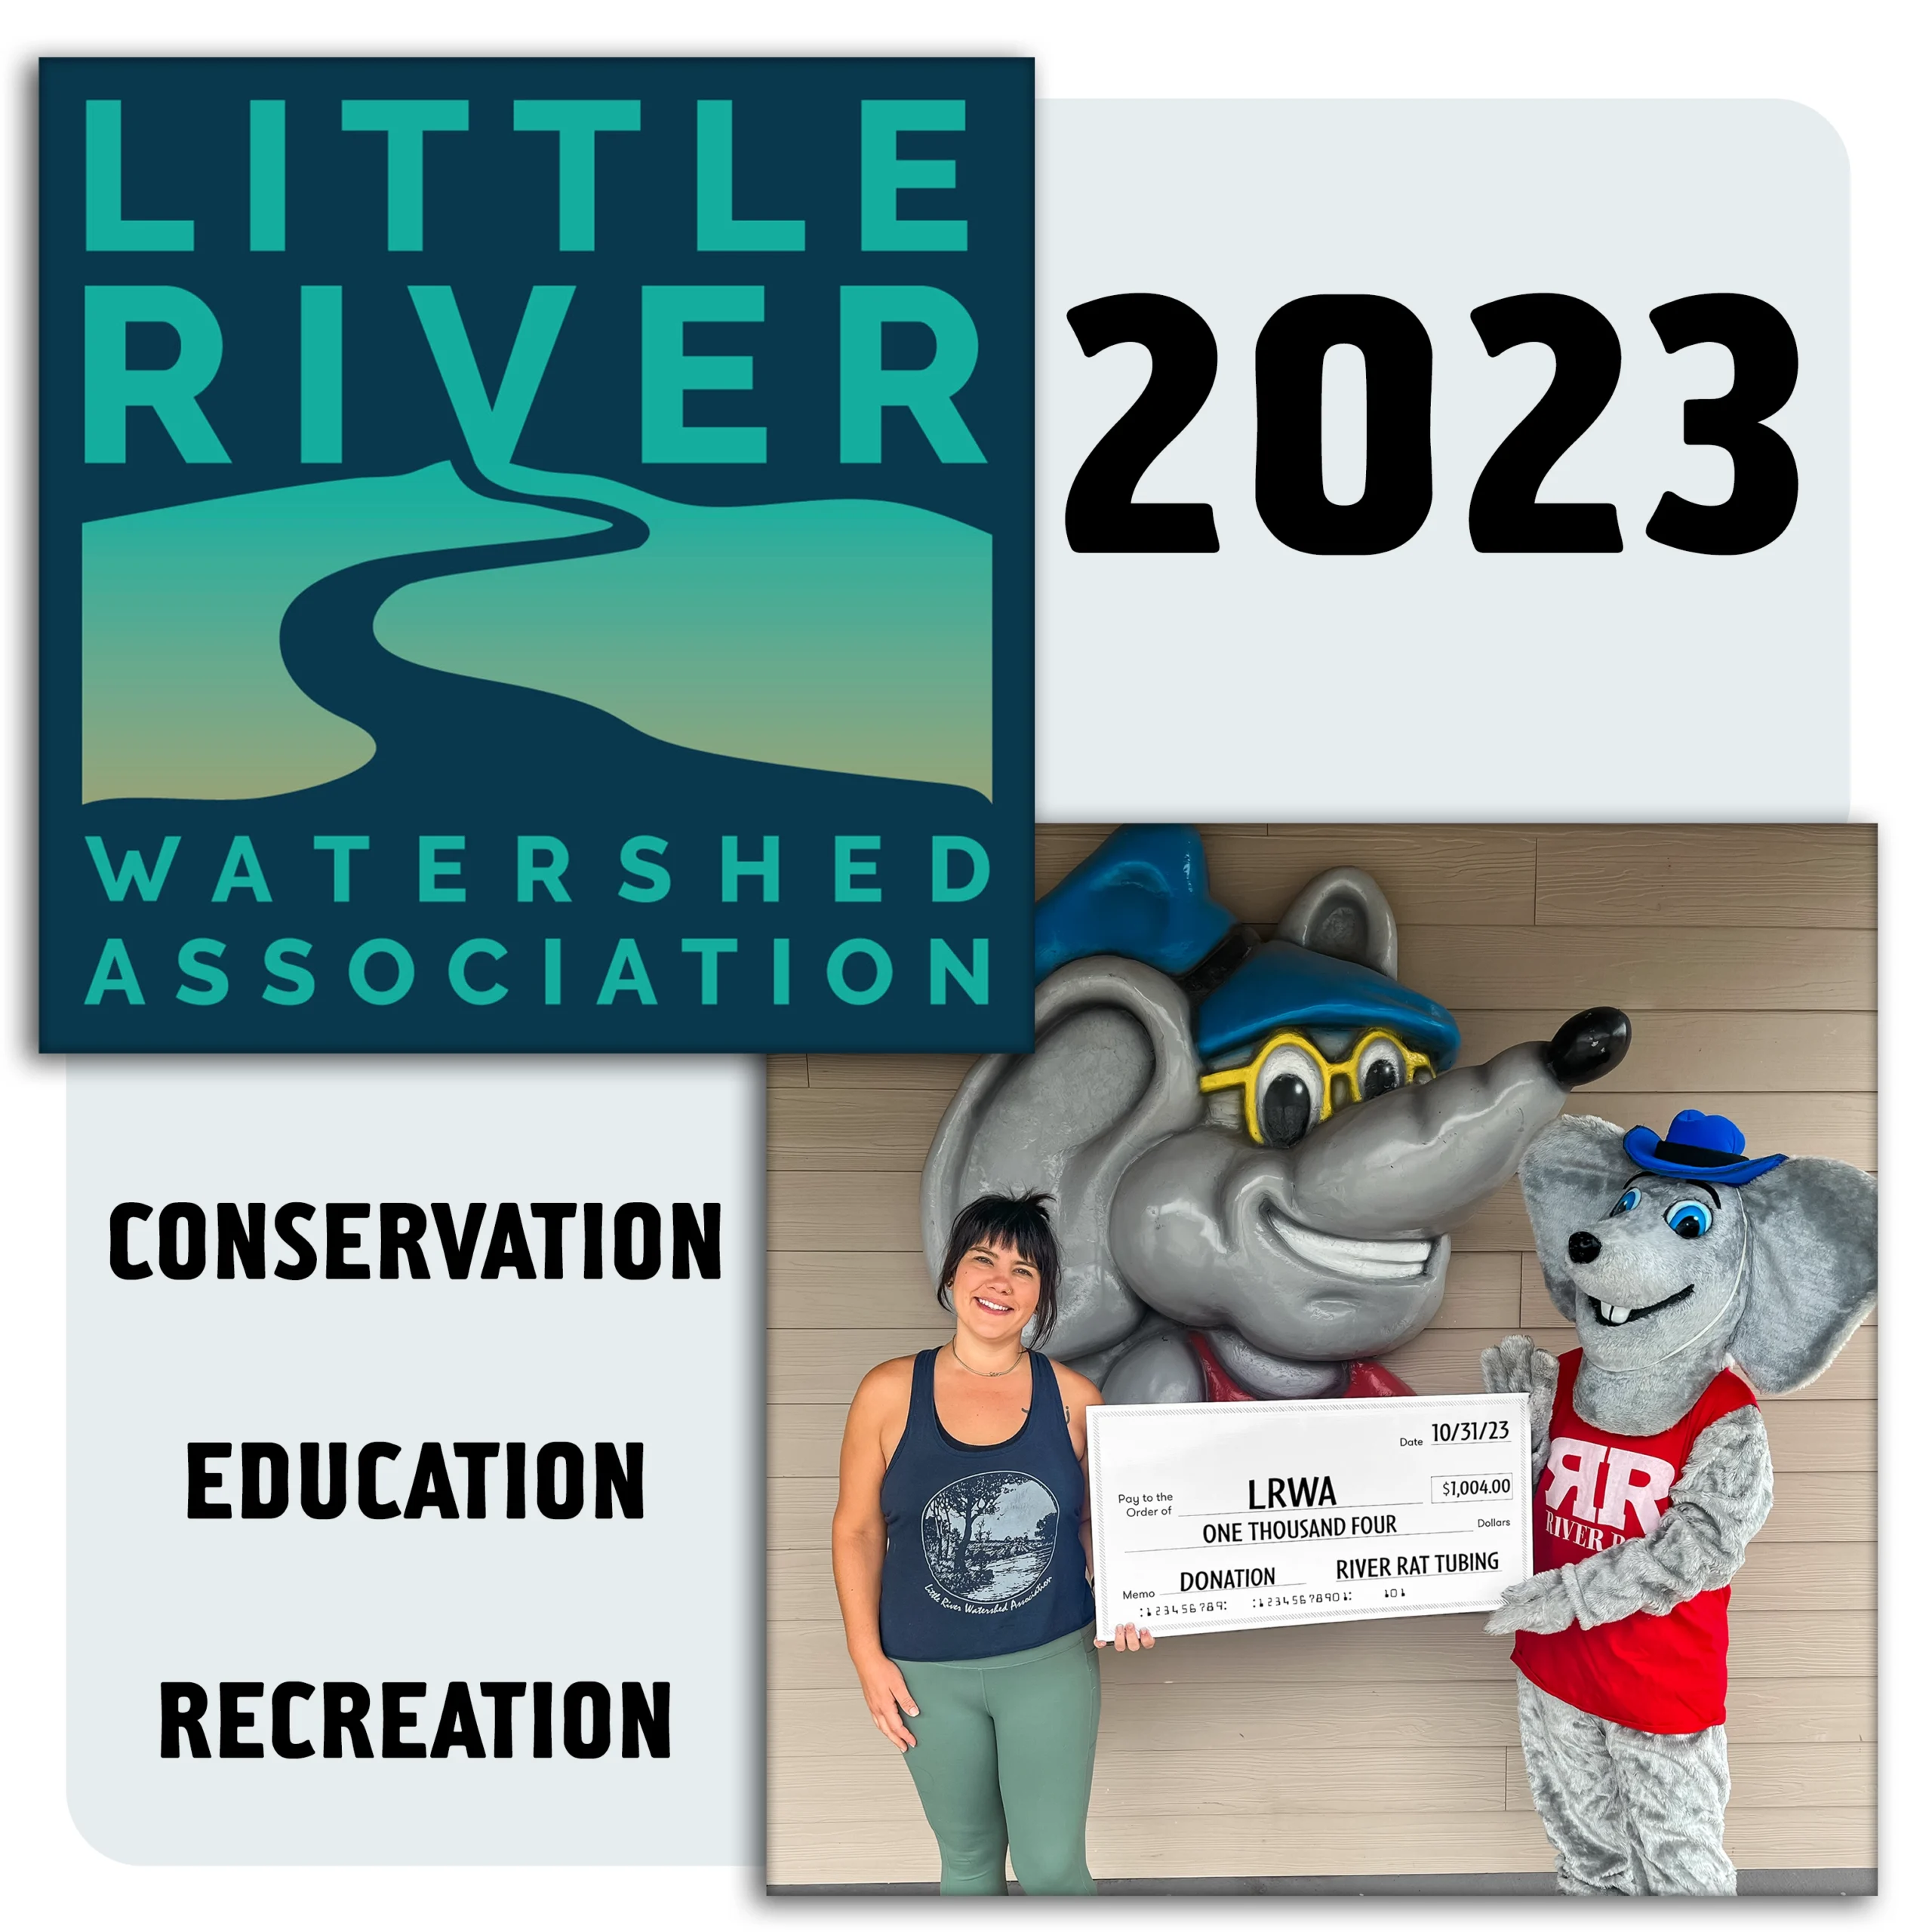 River Rat donation to Little river watershed assocation